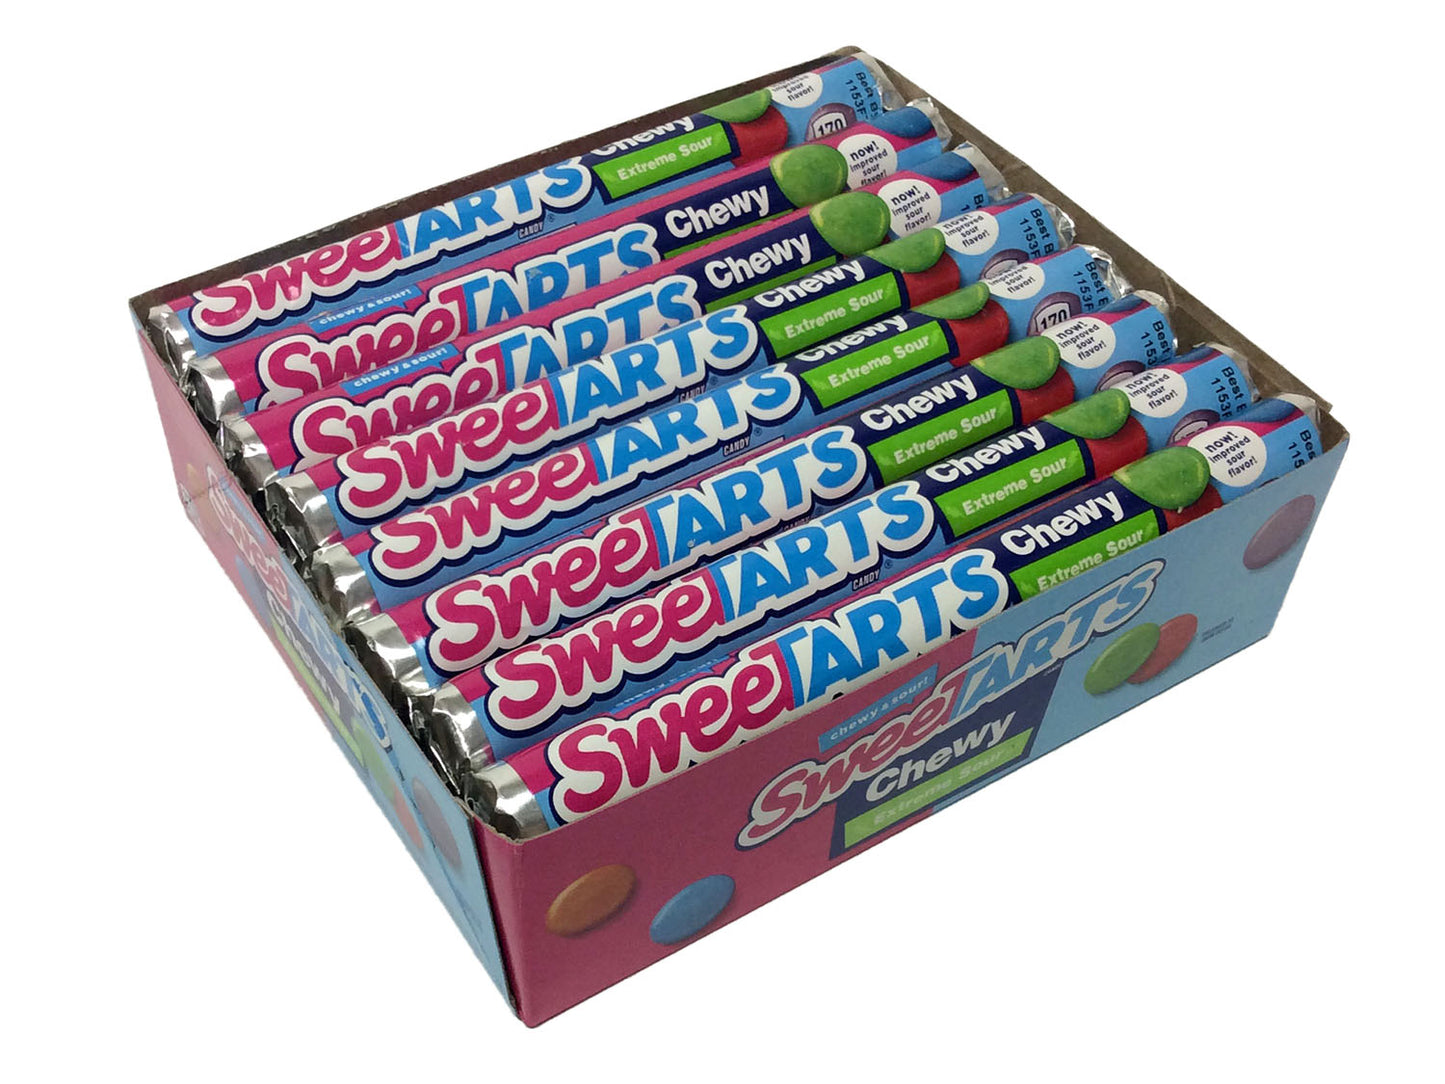 Shockers Sour Cherry Chewy Bar 20's, Sweets, KR Sweets, Catalogue